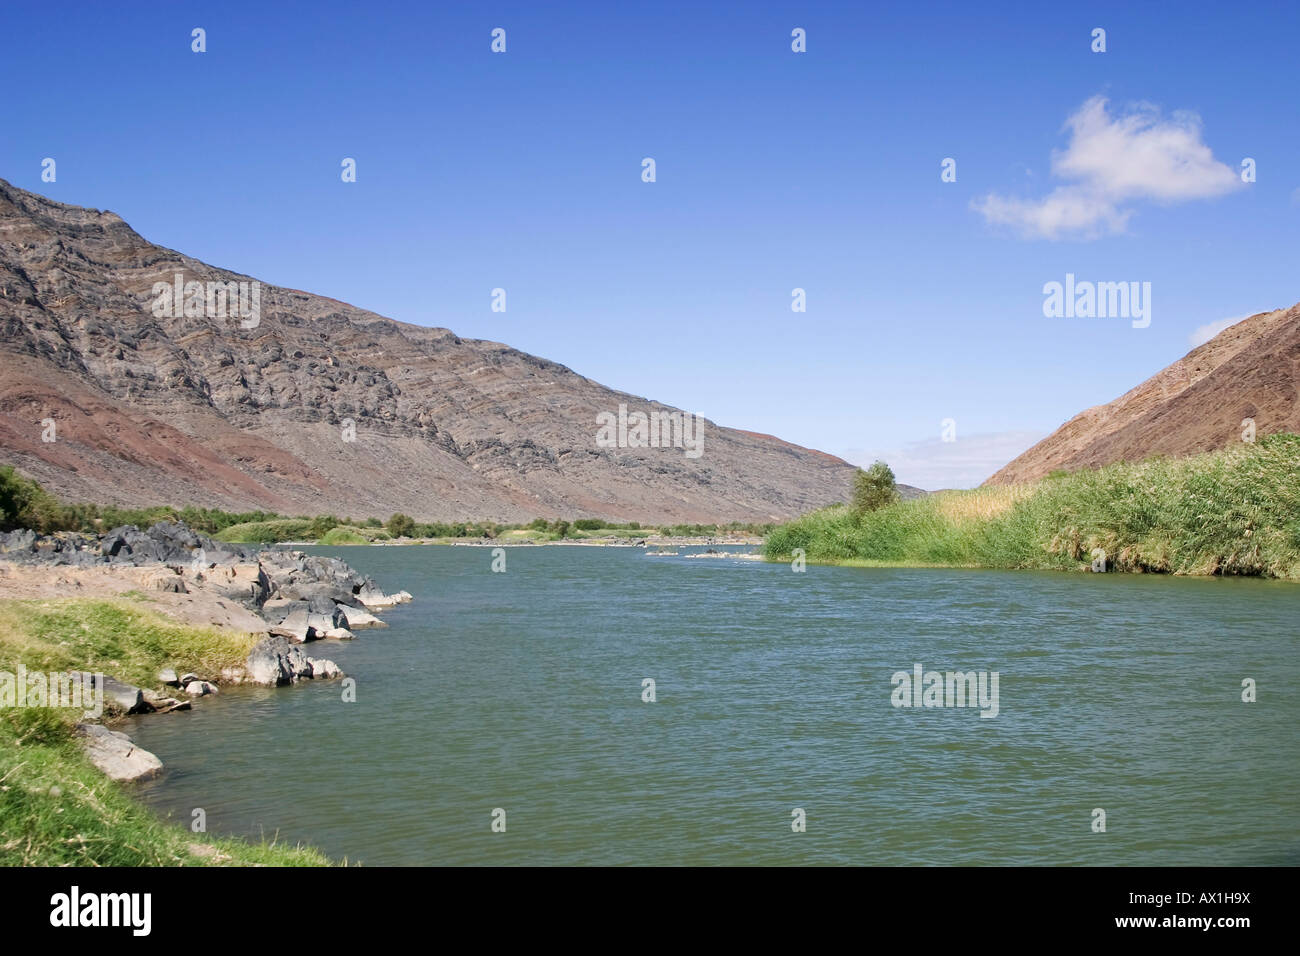 Boarder River Oranje River between South Africa and Namibia, Africa Stock Photo